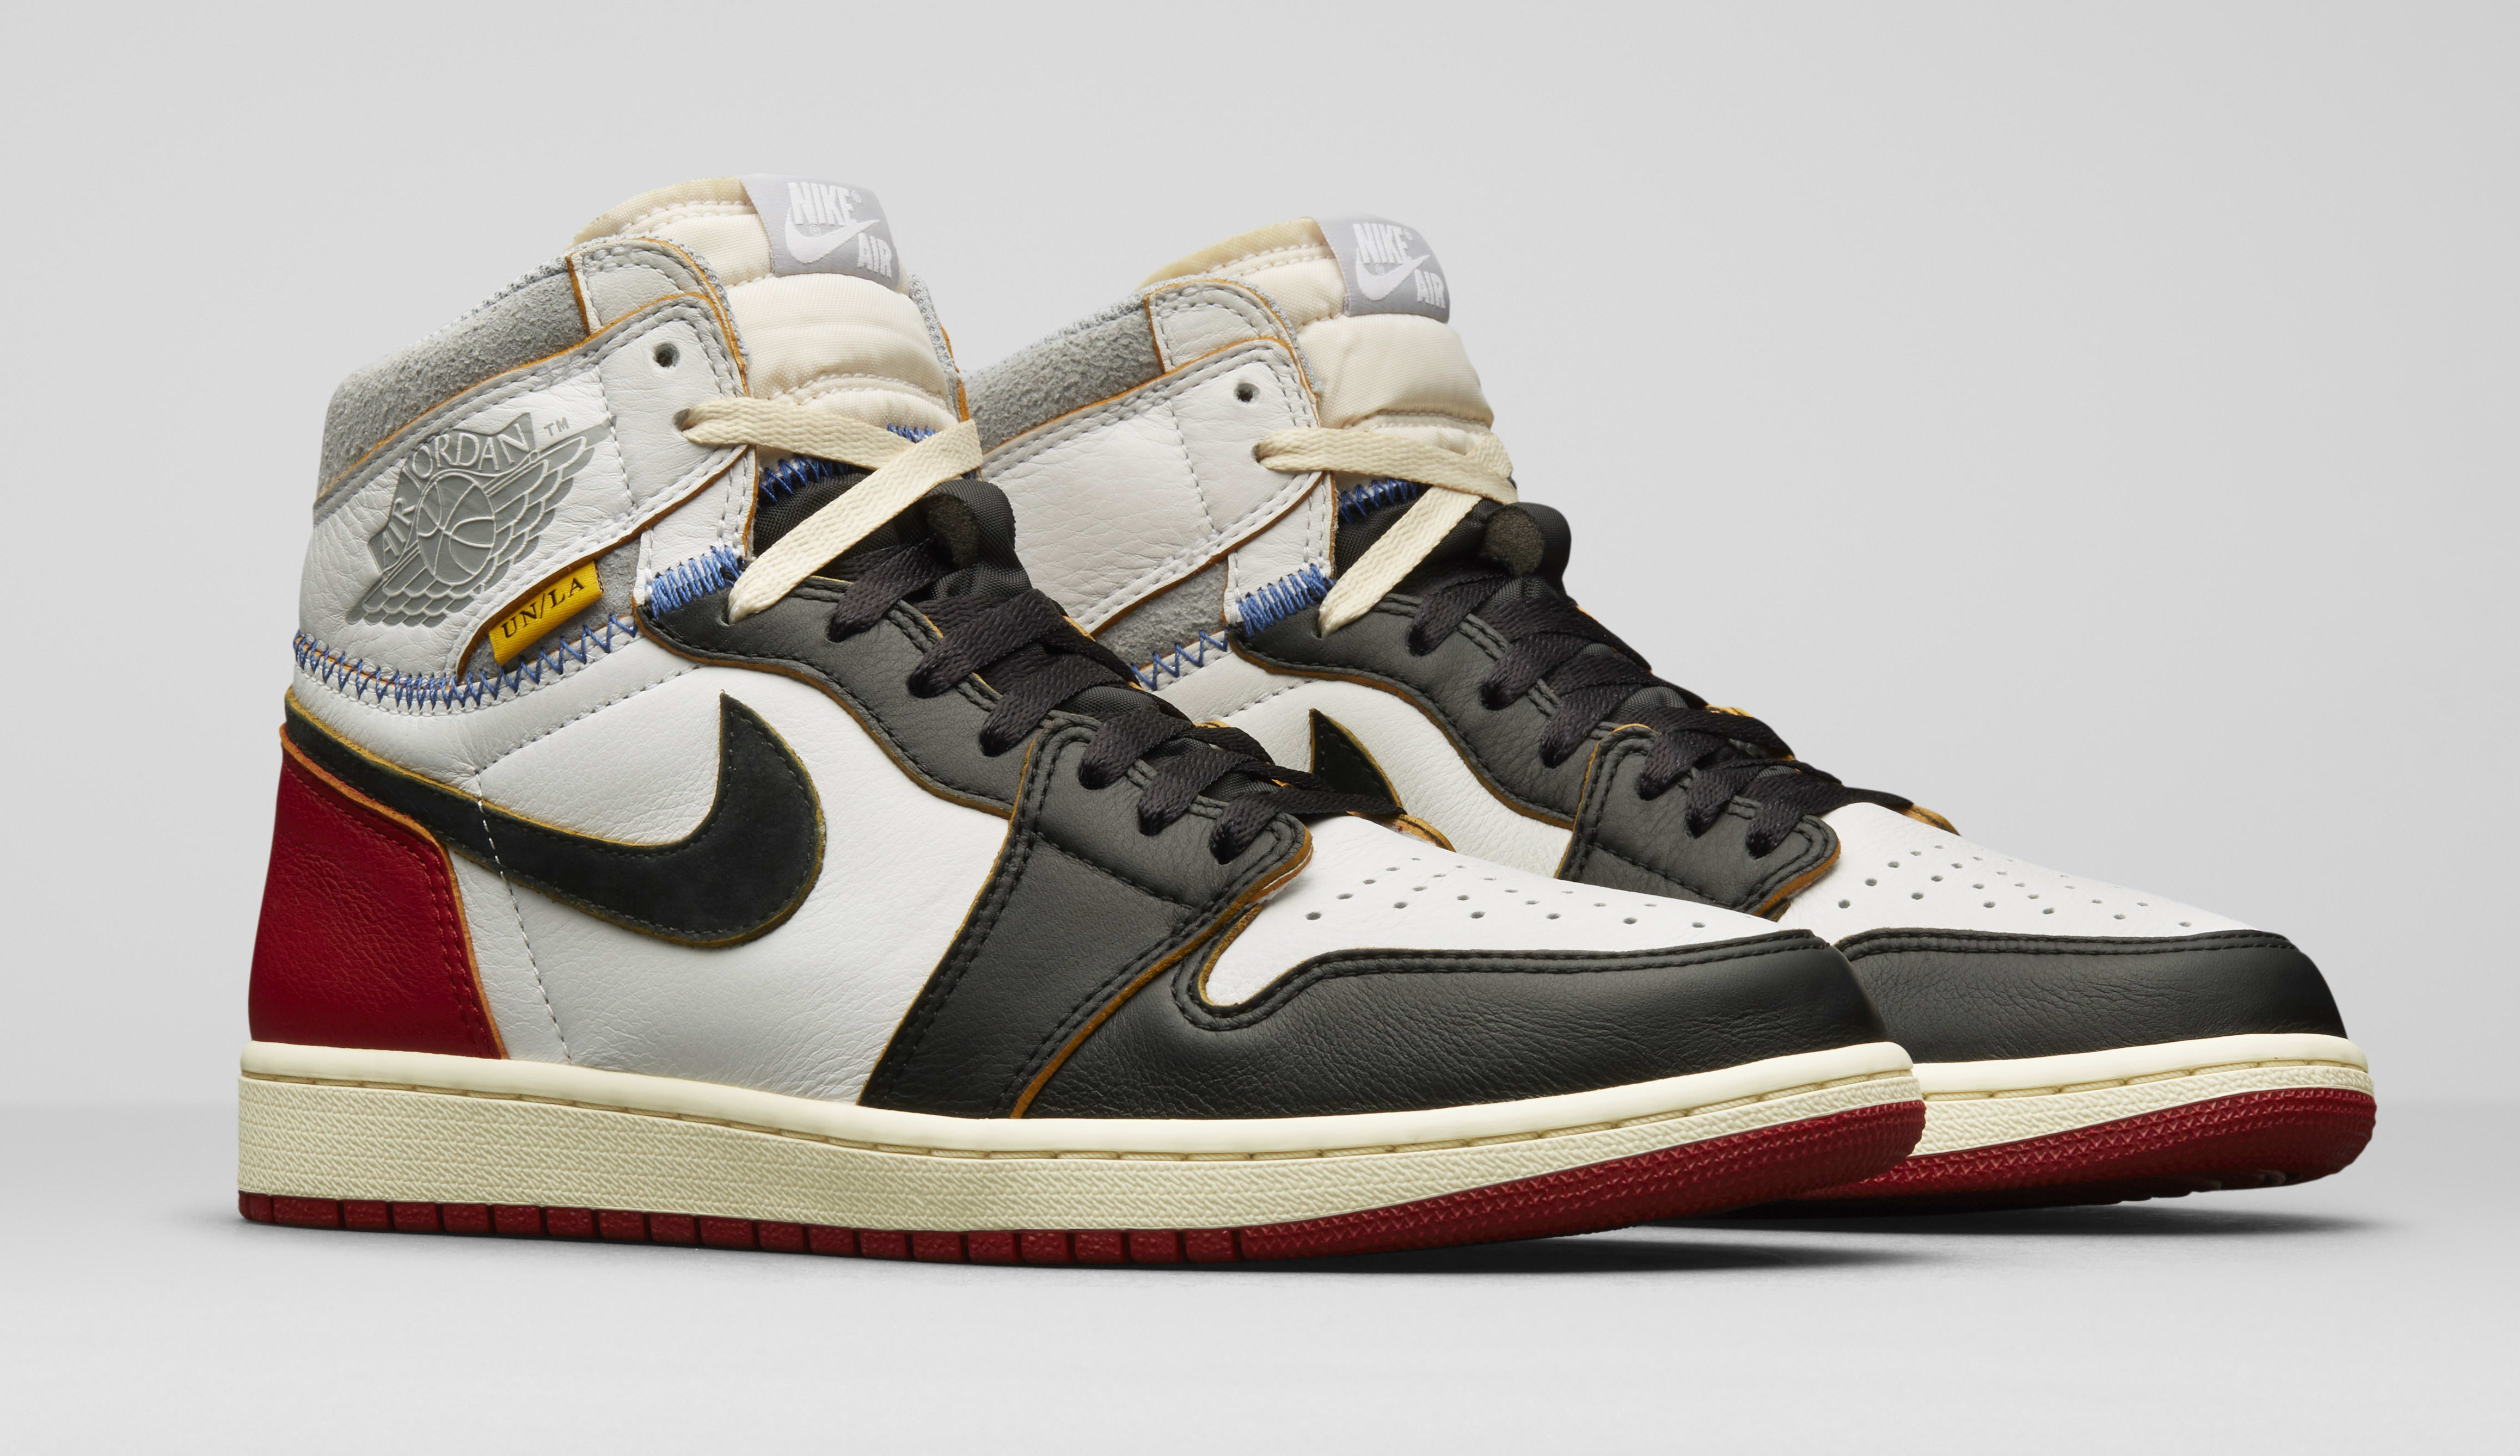 How to Get the Union x Air Jordan 1 | Complex